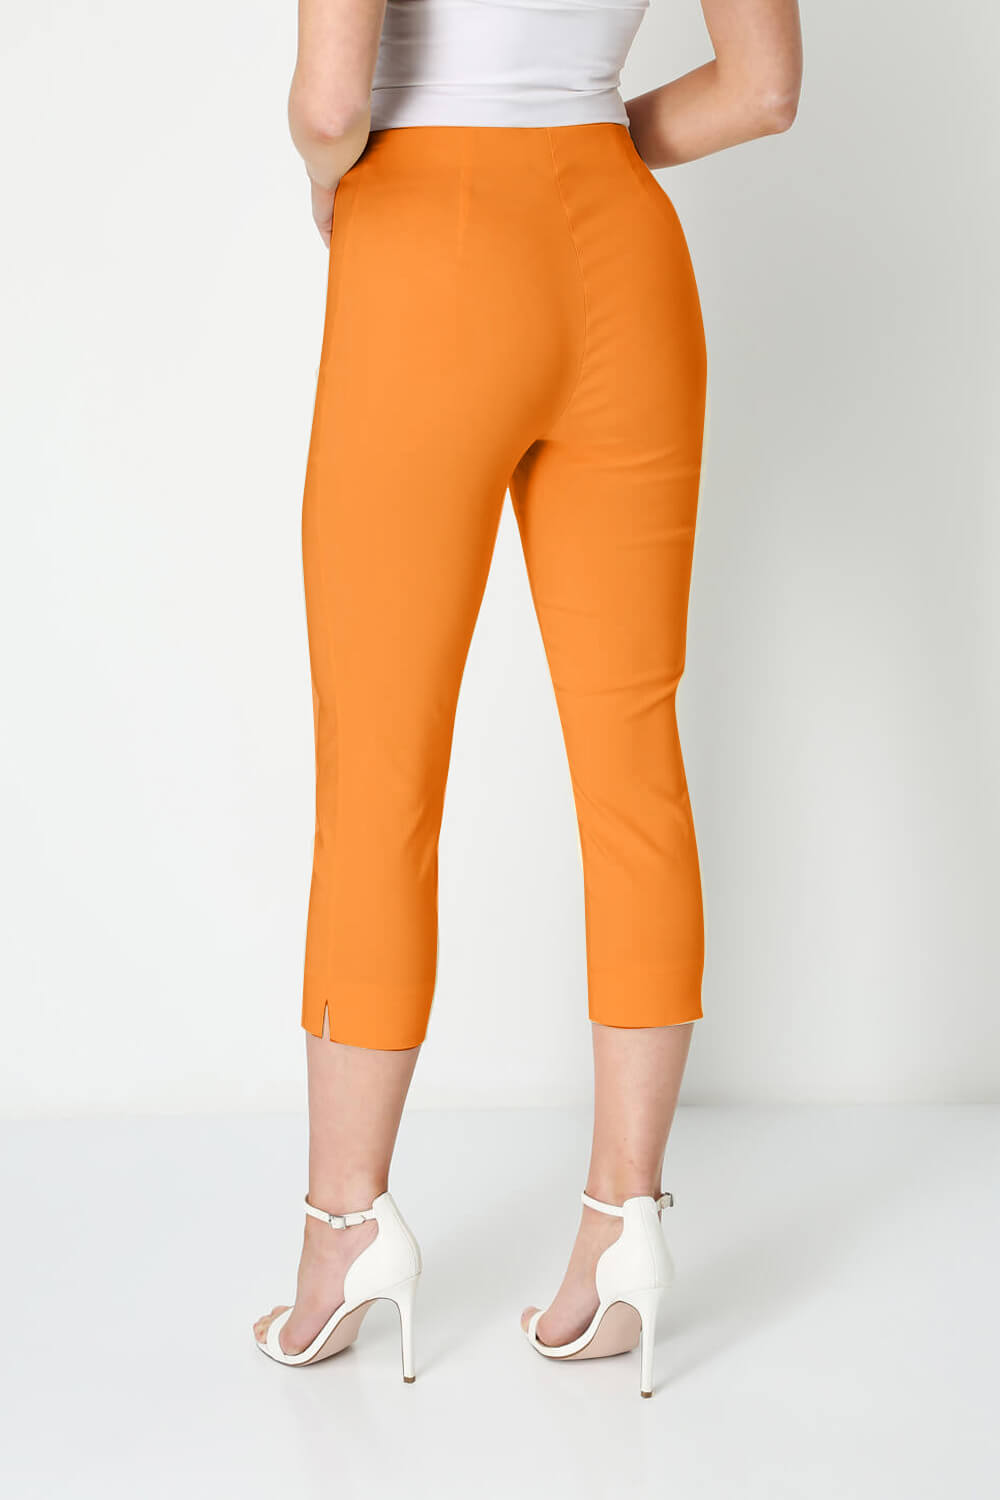 ORANGE Cropped Stretch Trouser, Image 2 of 7